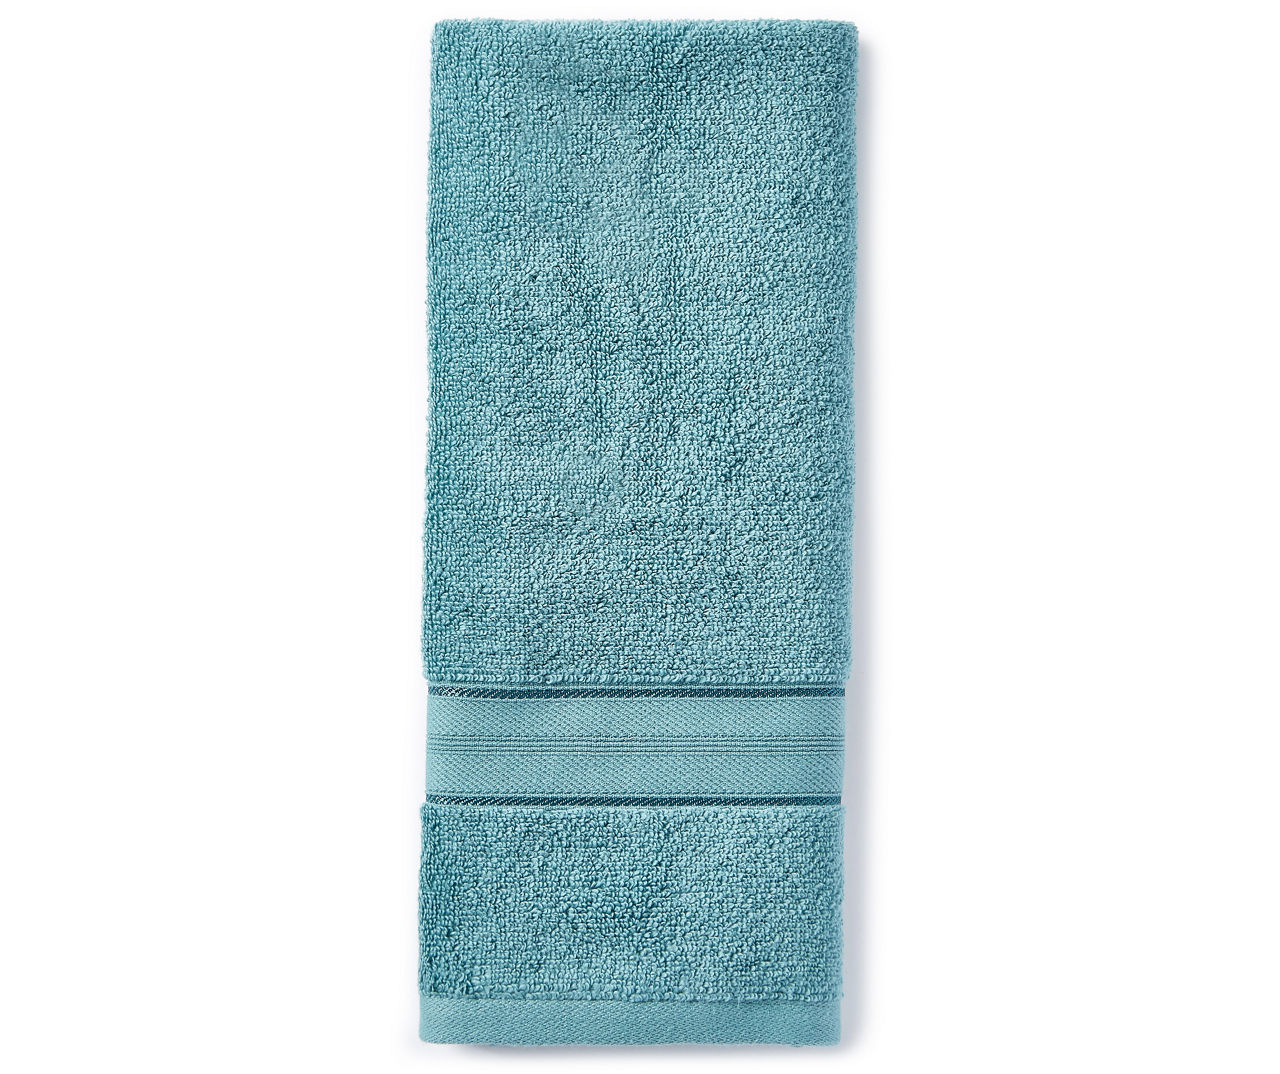 LC HAND TOWEL MINERAL BLUE